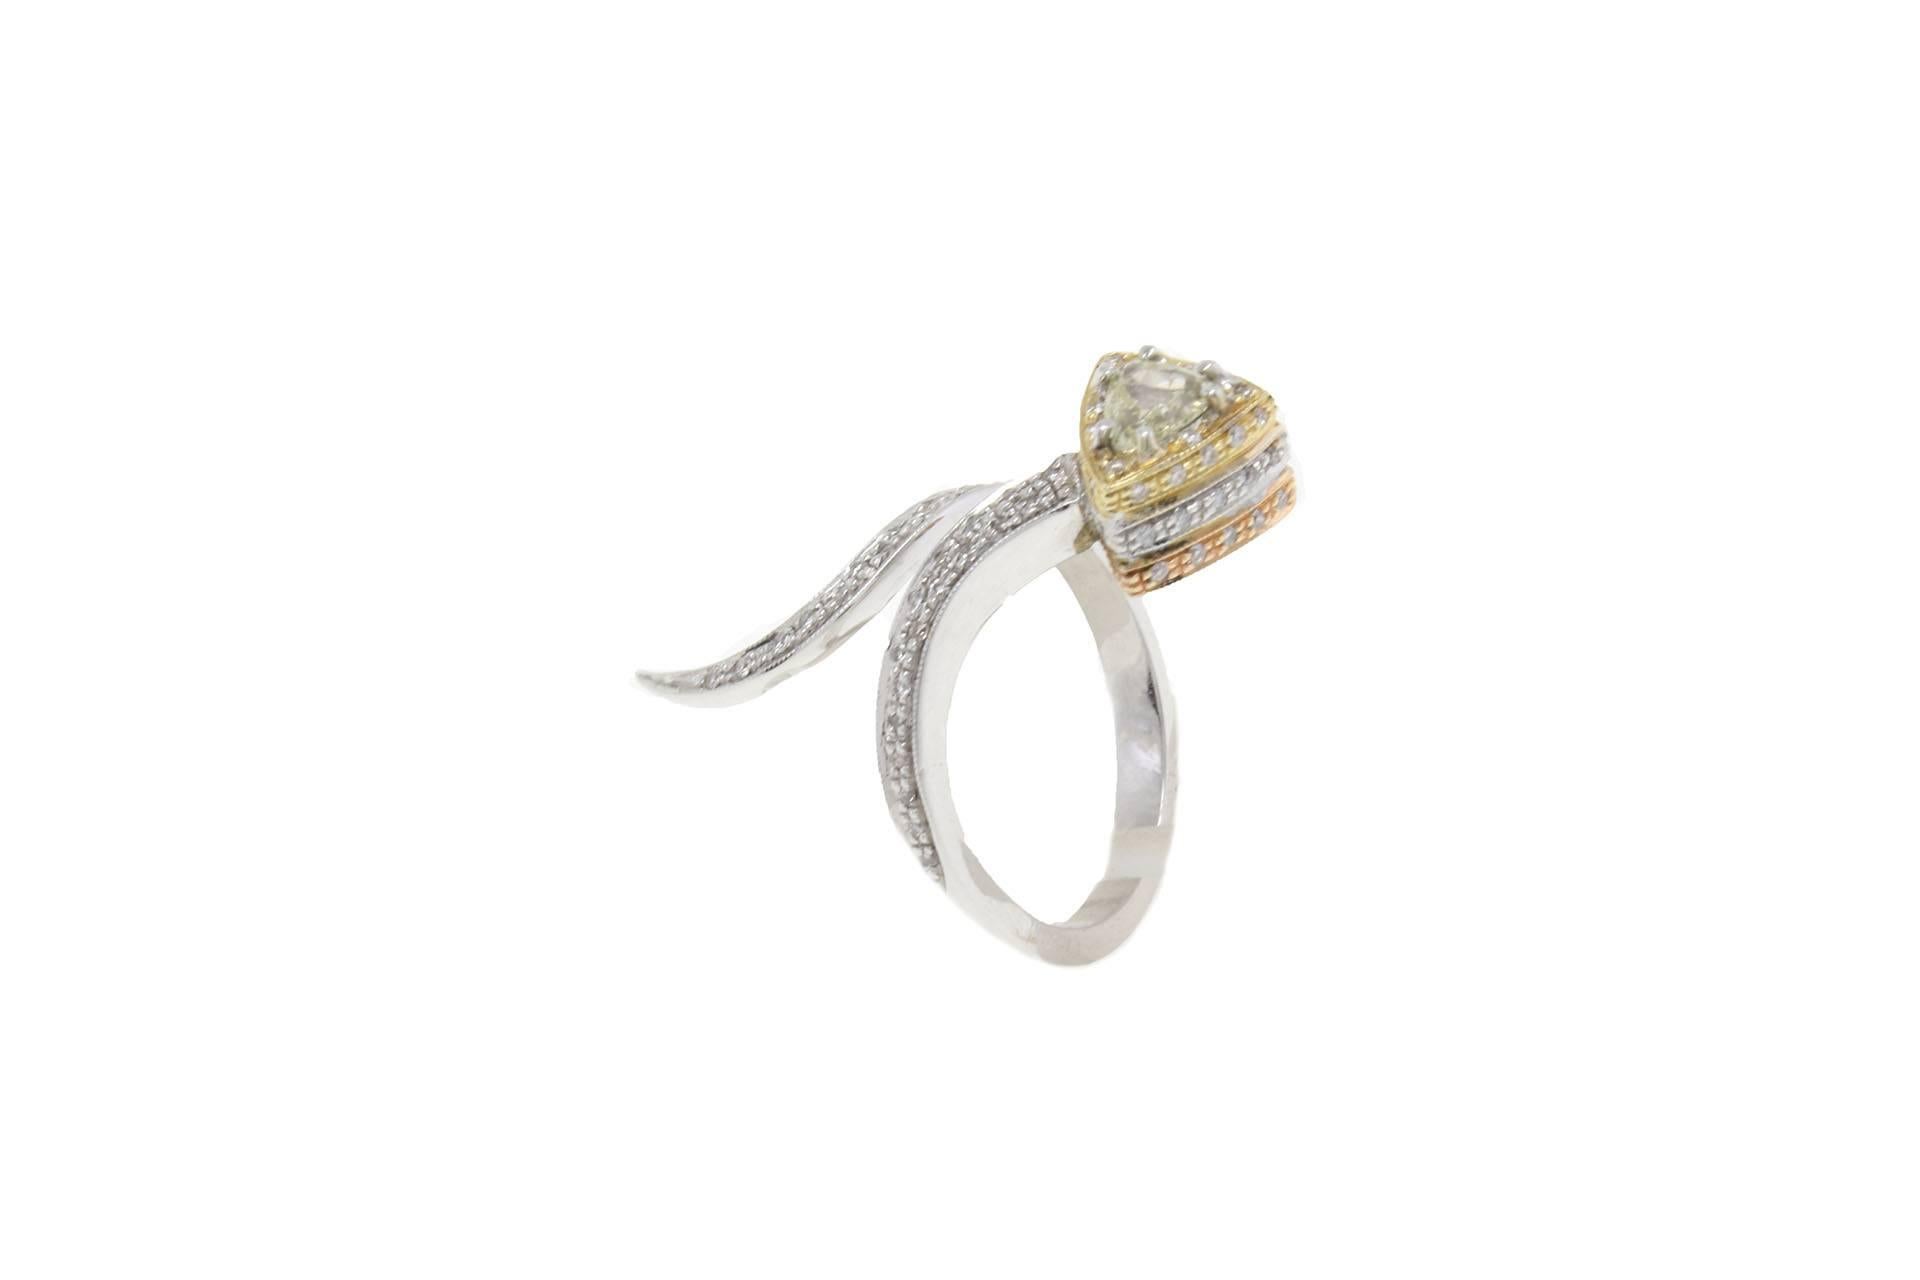 18 kt three different gold color (rose gold, white gold, yellow gold) with diamonds (0.36 kt) all around the ring and a central fancy diamond (0.38 kt)
tot. weight  6.40 gr
r. f  uiiu